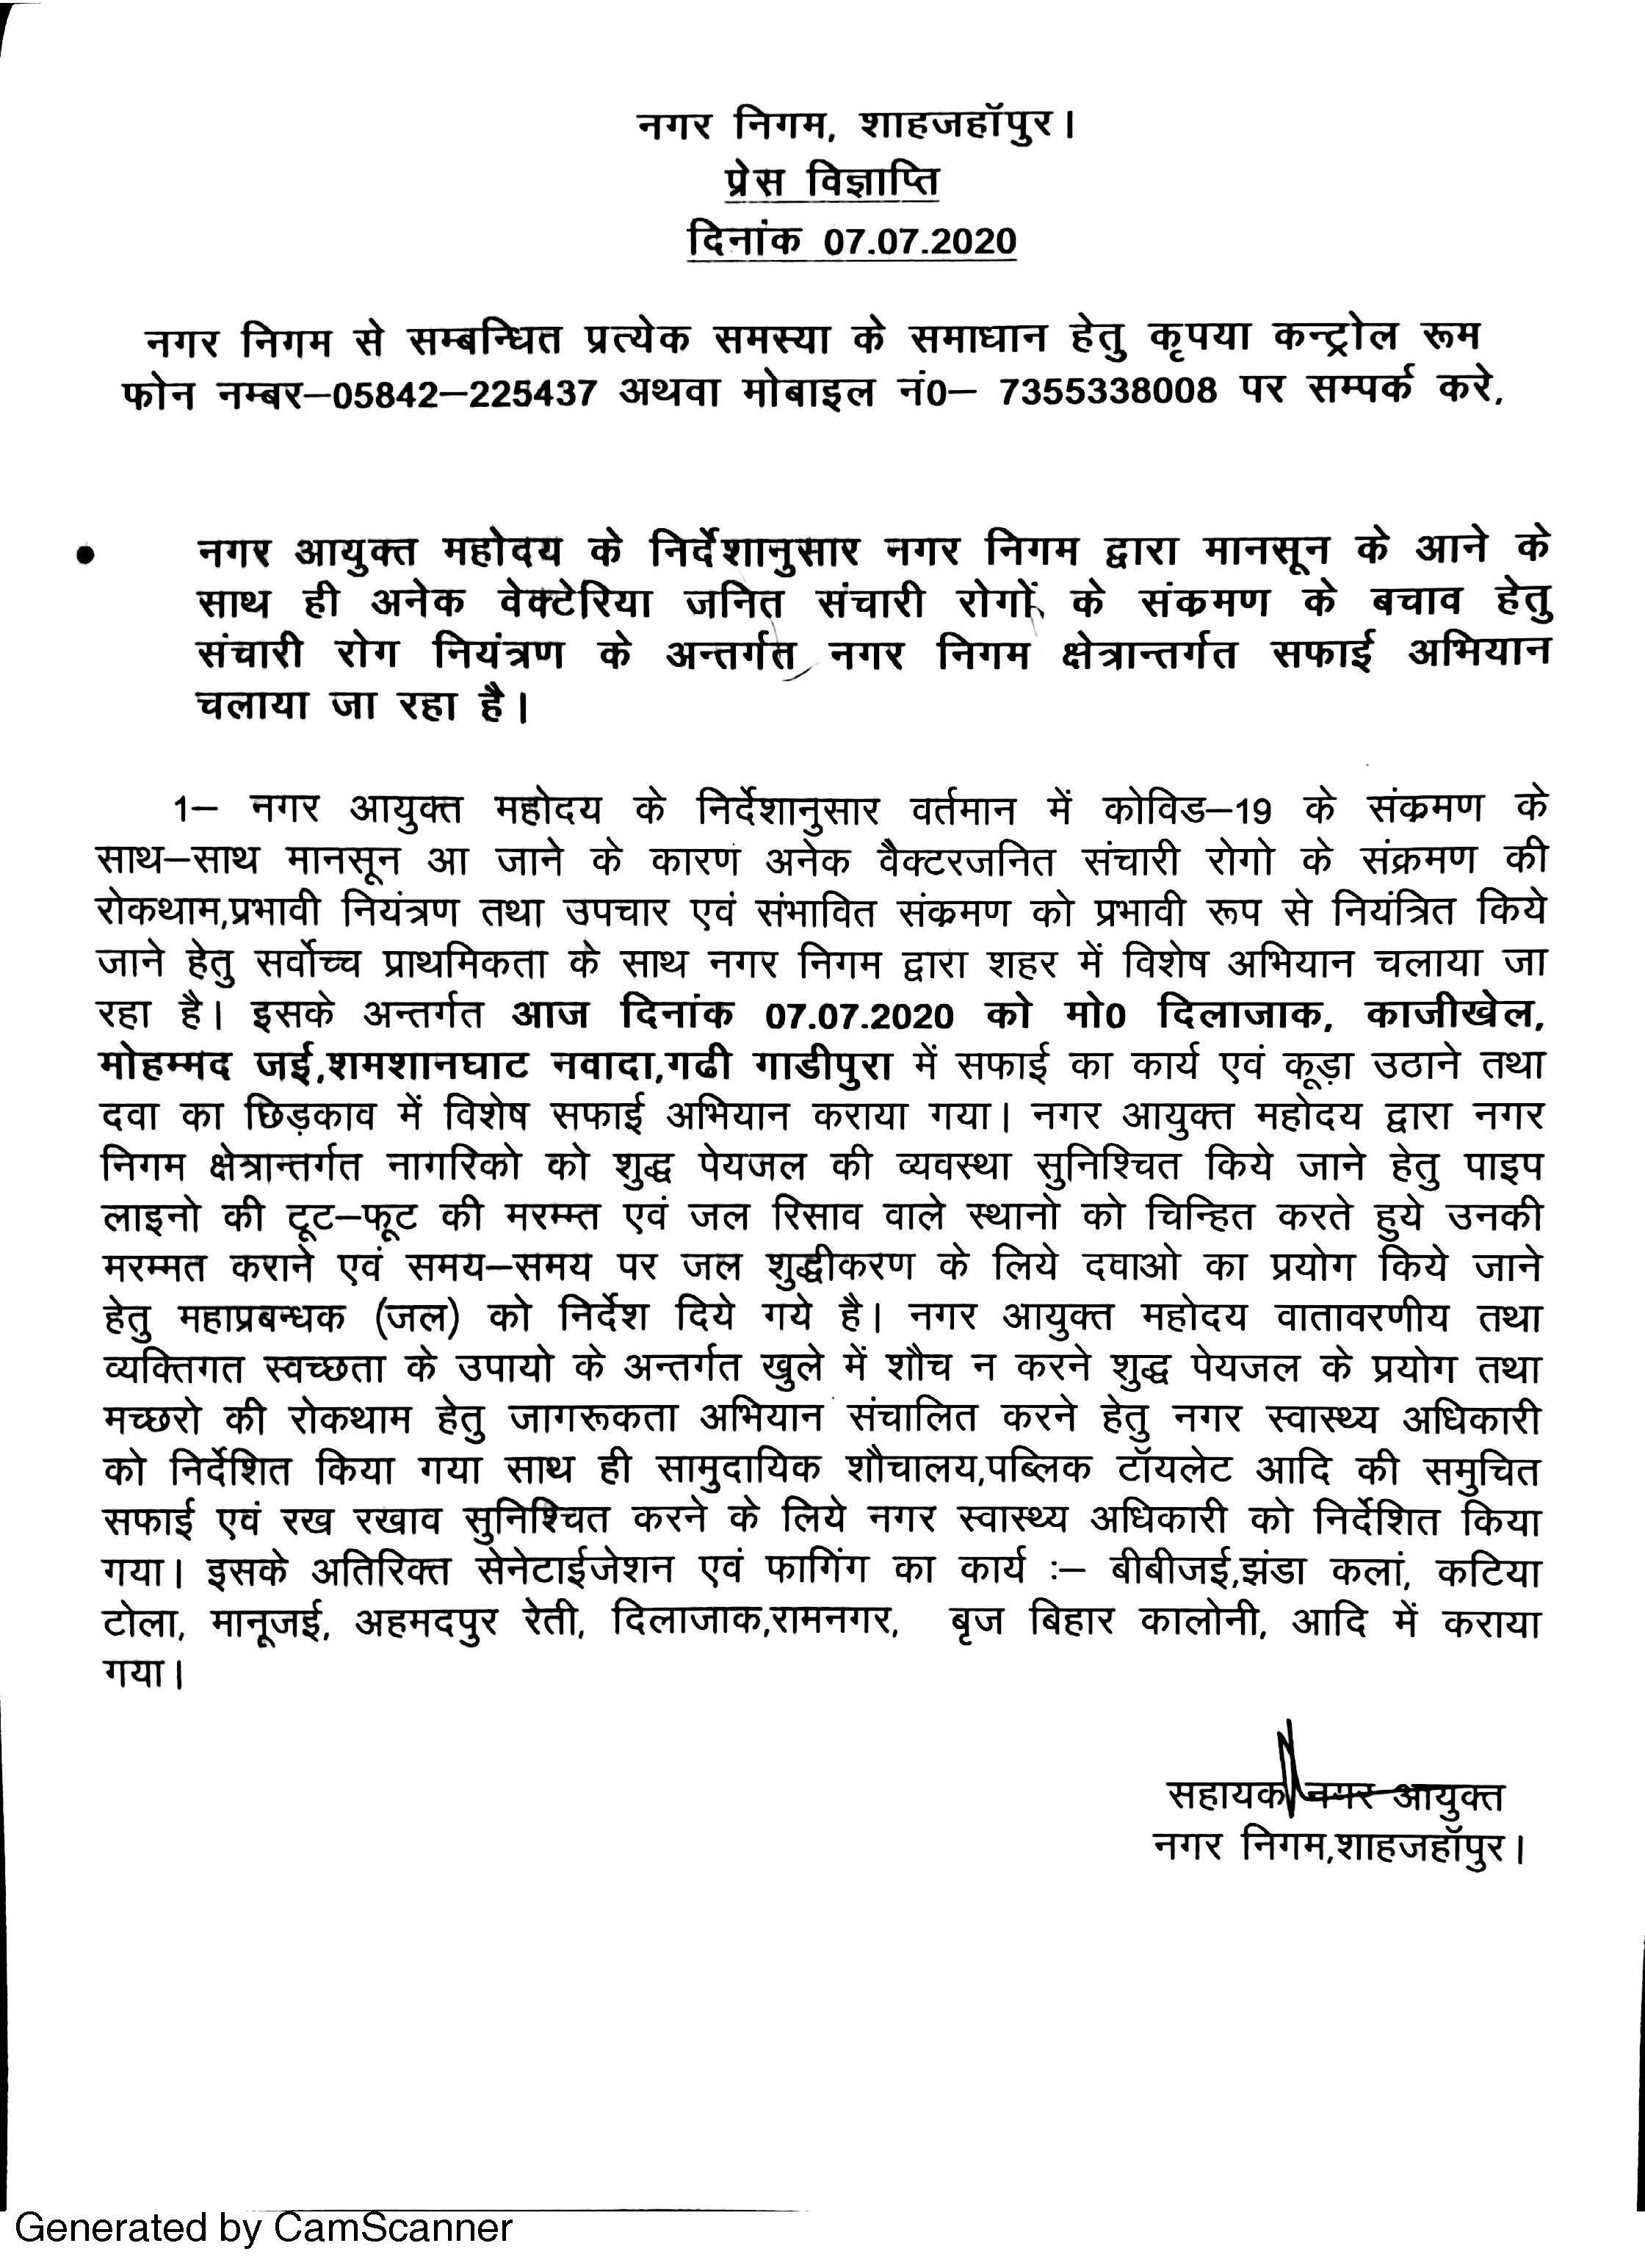 Regarding press release against the cleanliness works carried out in the city on 07.07.2020 according to the guidelines of Municipal Commissioner